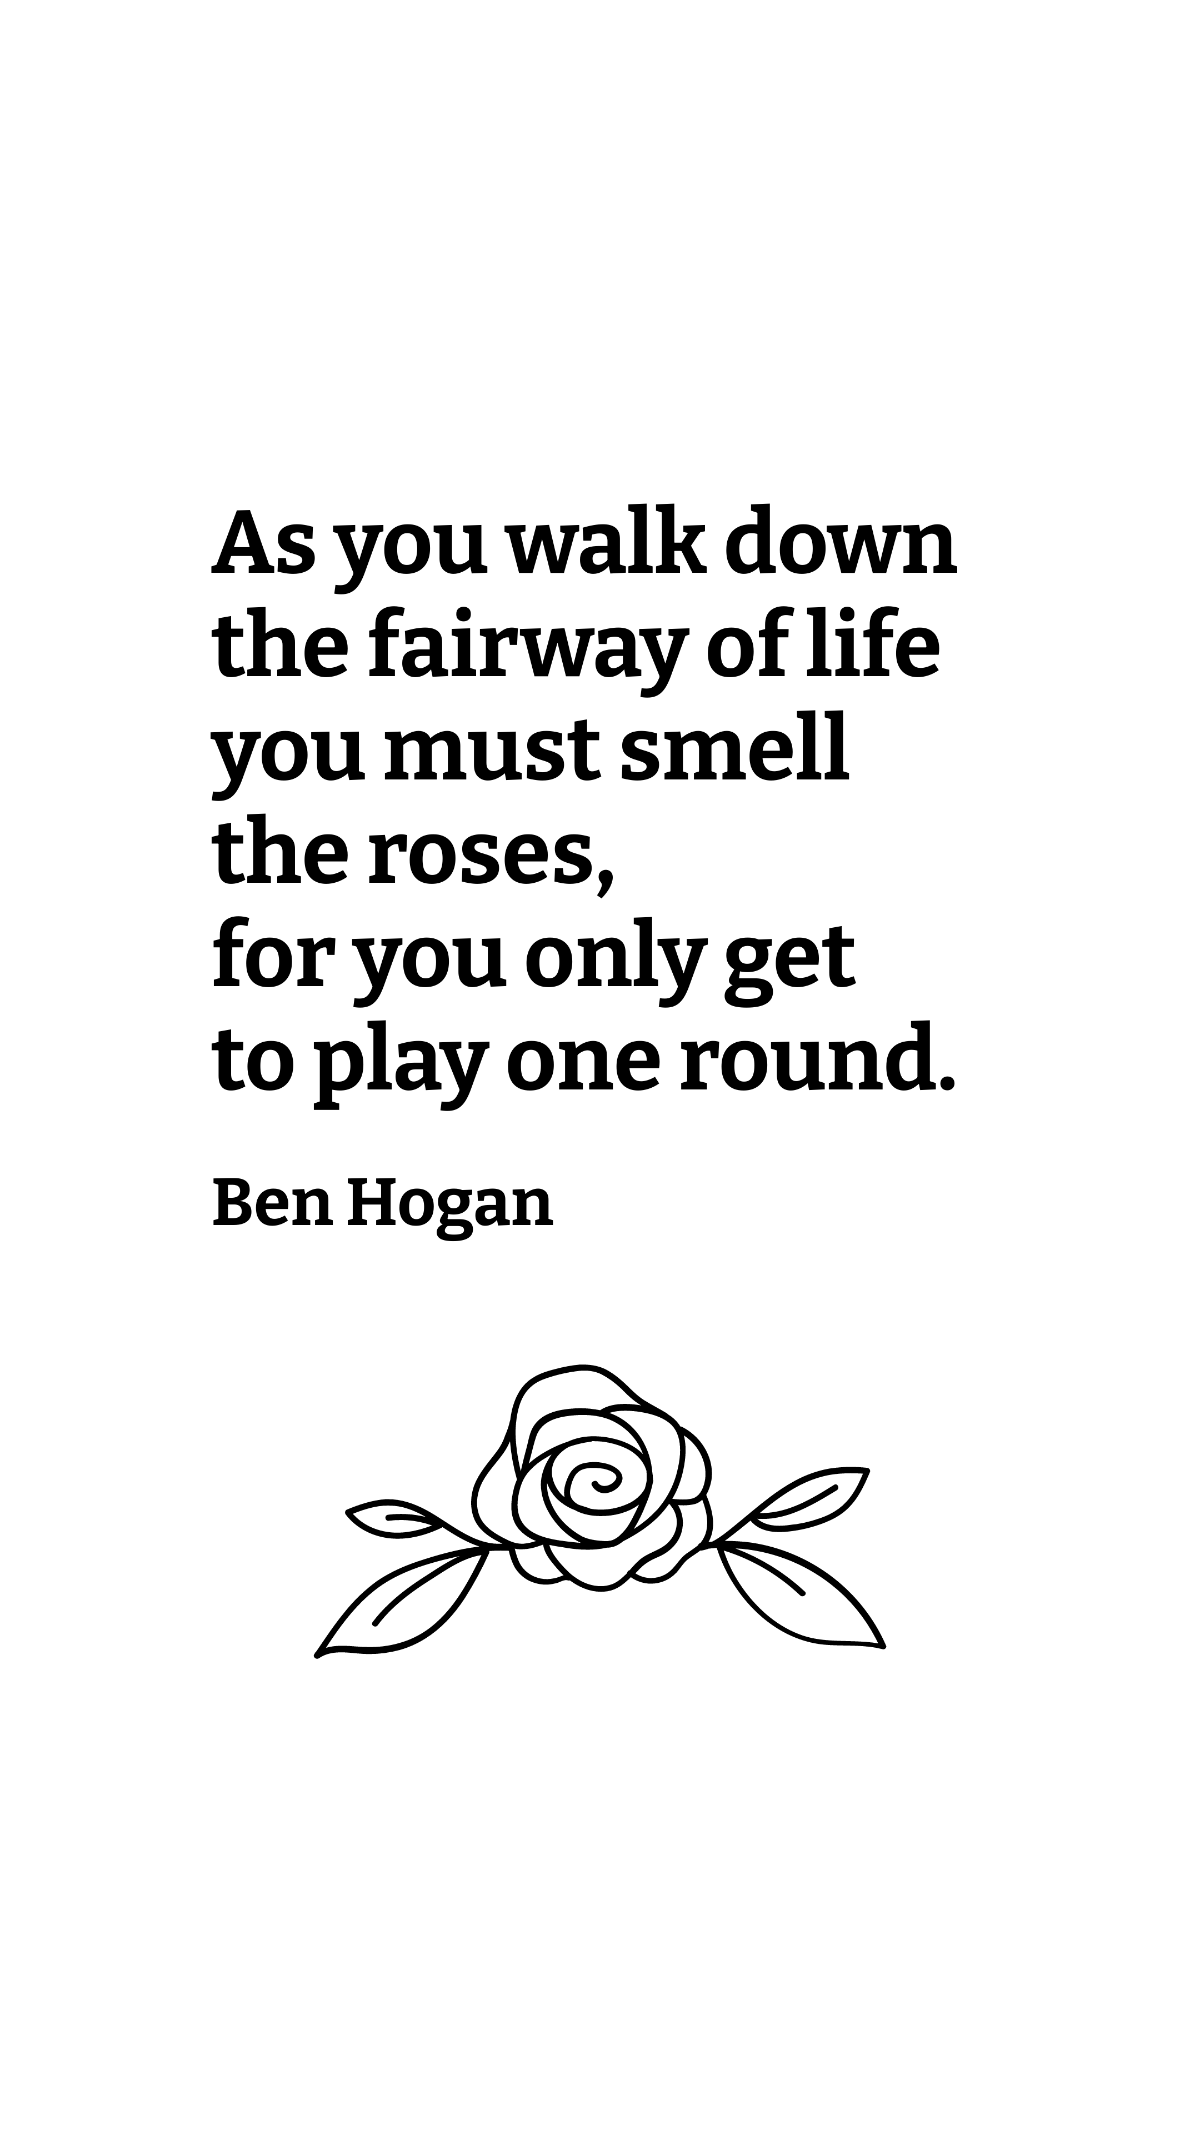 Ben Hogan - As you walk down the fairway of life you must smell the roses, for you only get to play one round.